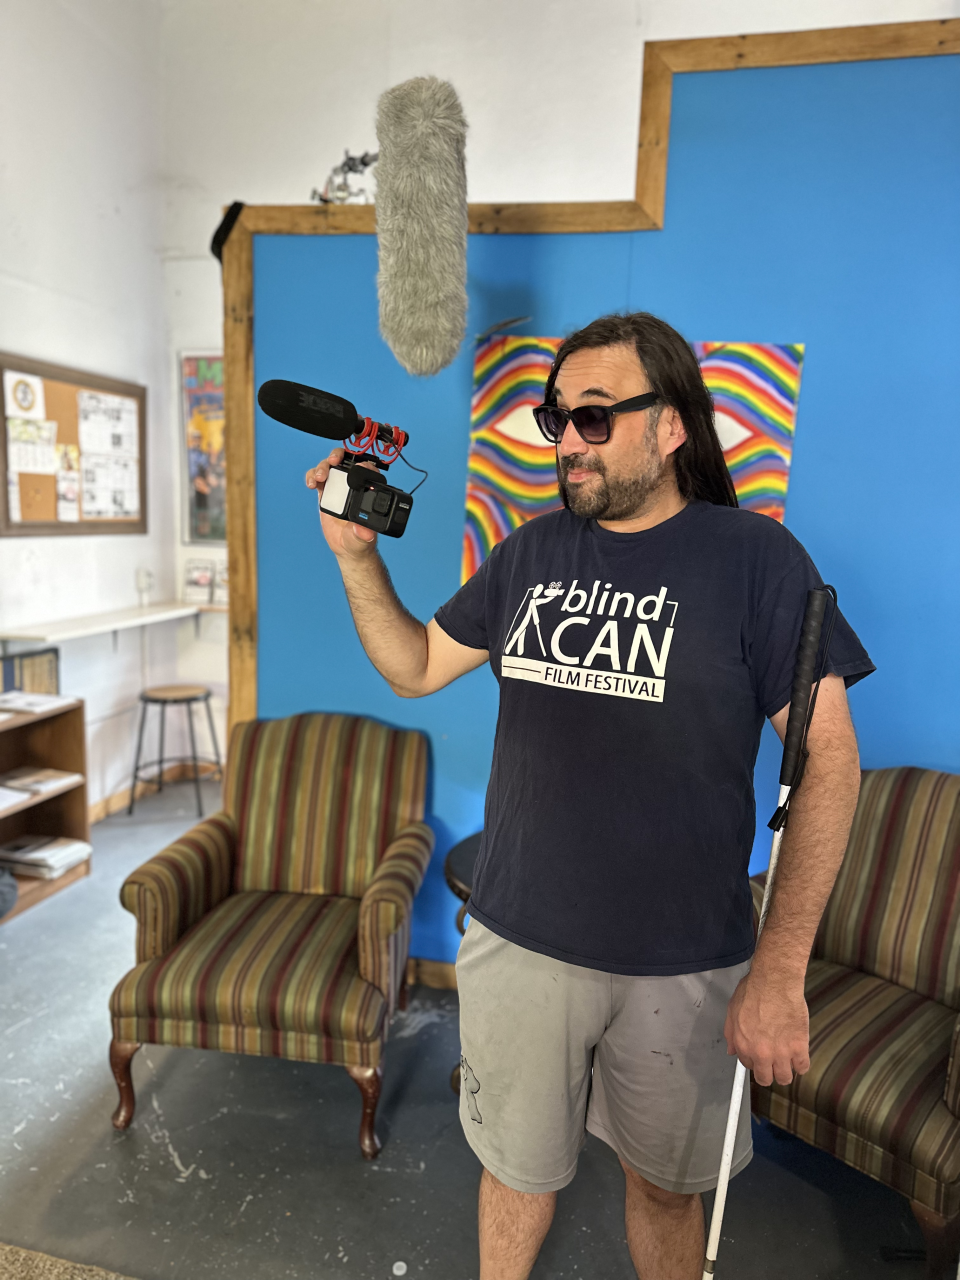 Ben Fox, founder and President of the blindCAN Film Festival, has several events coming up for fall of 2023. On Oct. 15, White Cane Awareness Day, the organization plans for the Red Carpet White Cane Celebration.